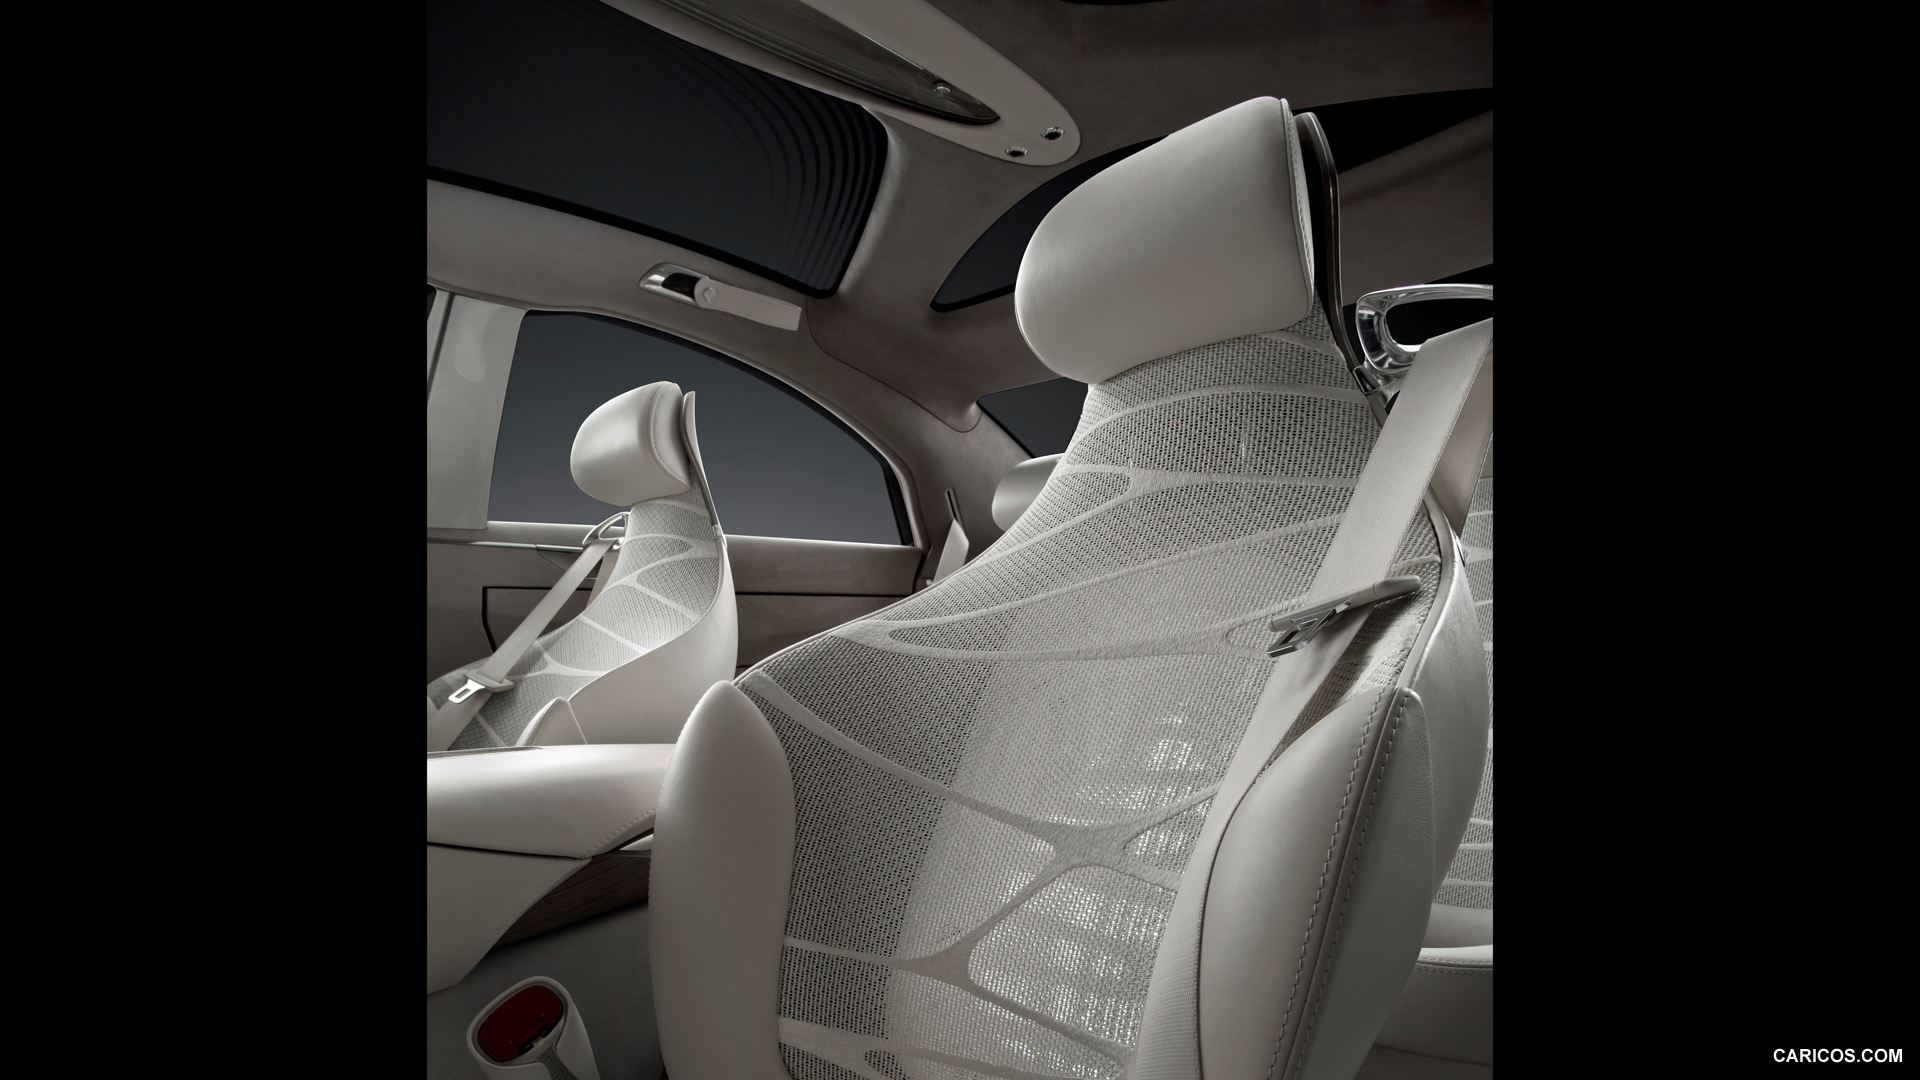 Mercedes-Benz F800 Style Concept (2010)  - Interior, Front Seats, #63 of 120